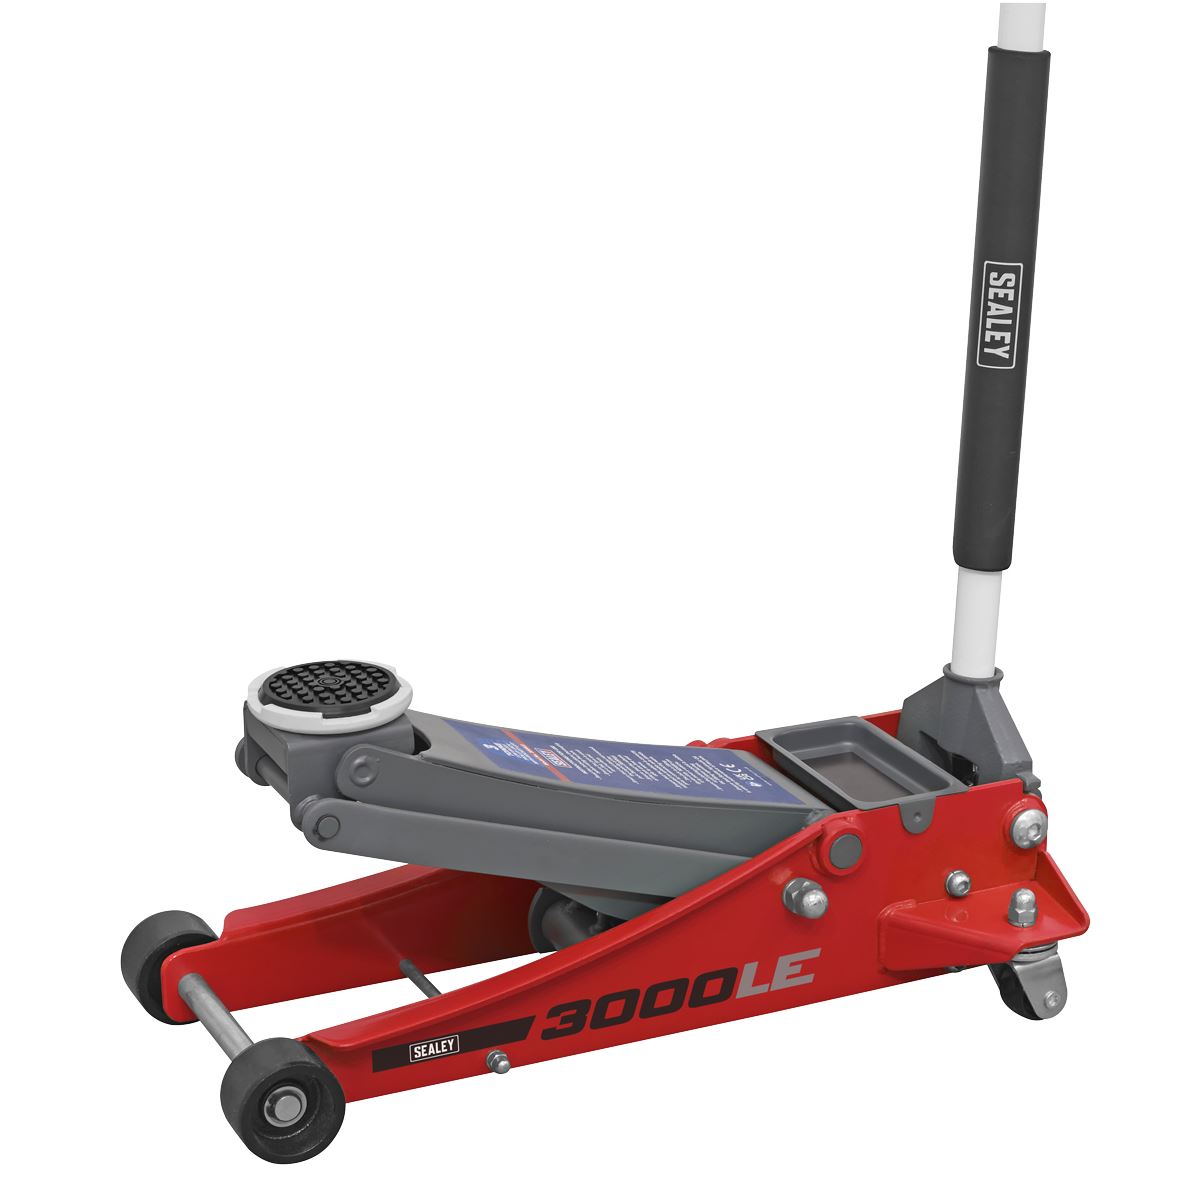 Sealey Low Profile Trolley Jack with Rocket Lift 3 Tonne - Red